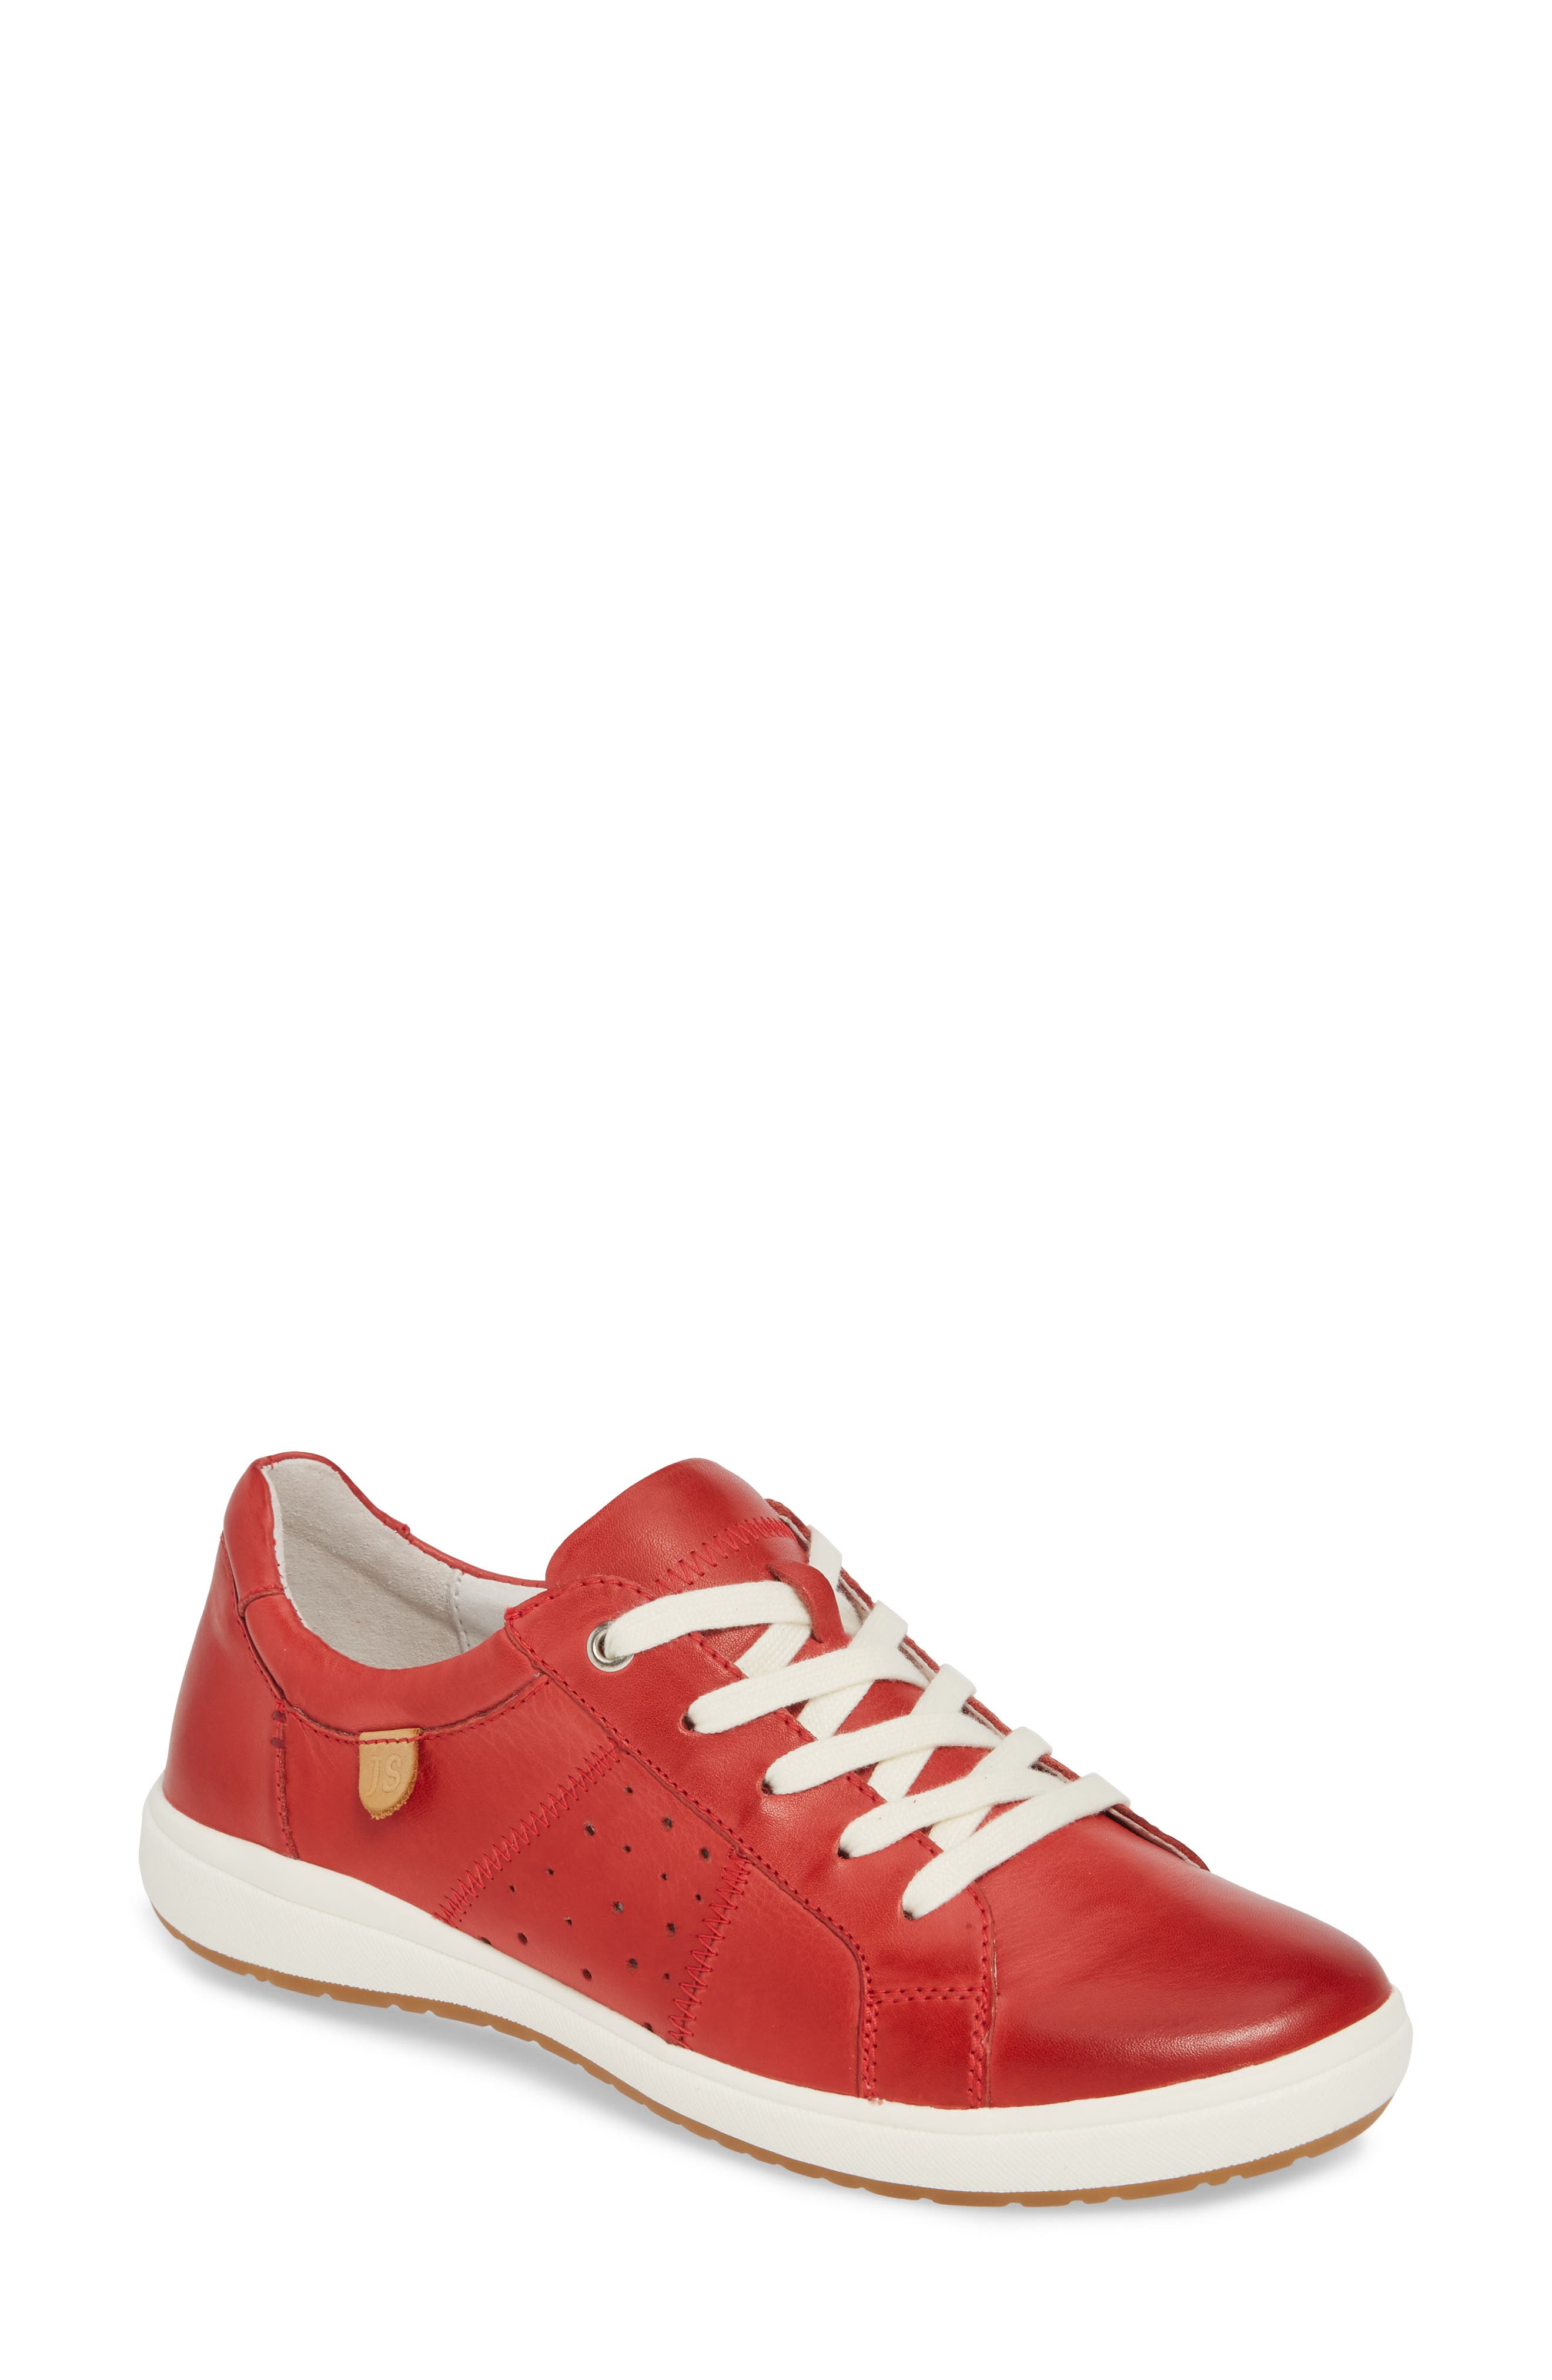 red sneakers for women